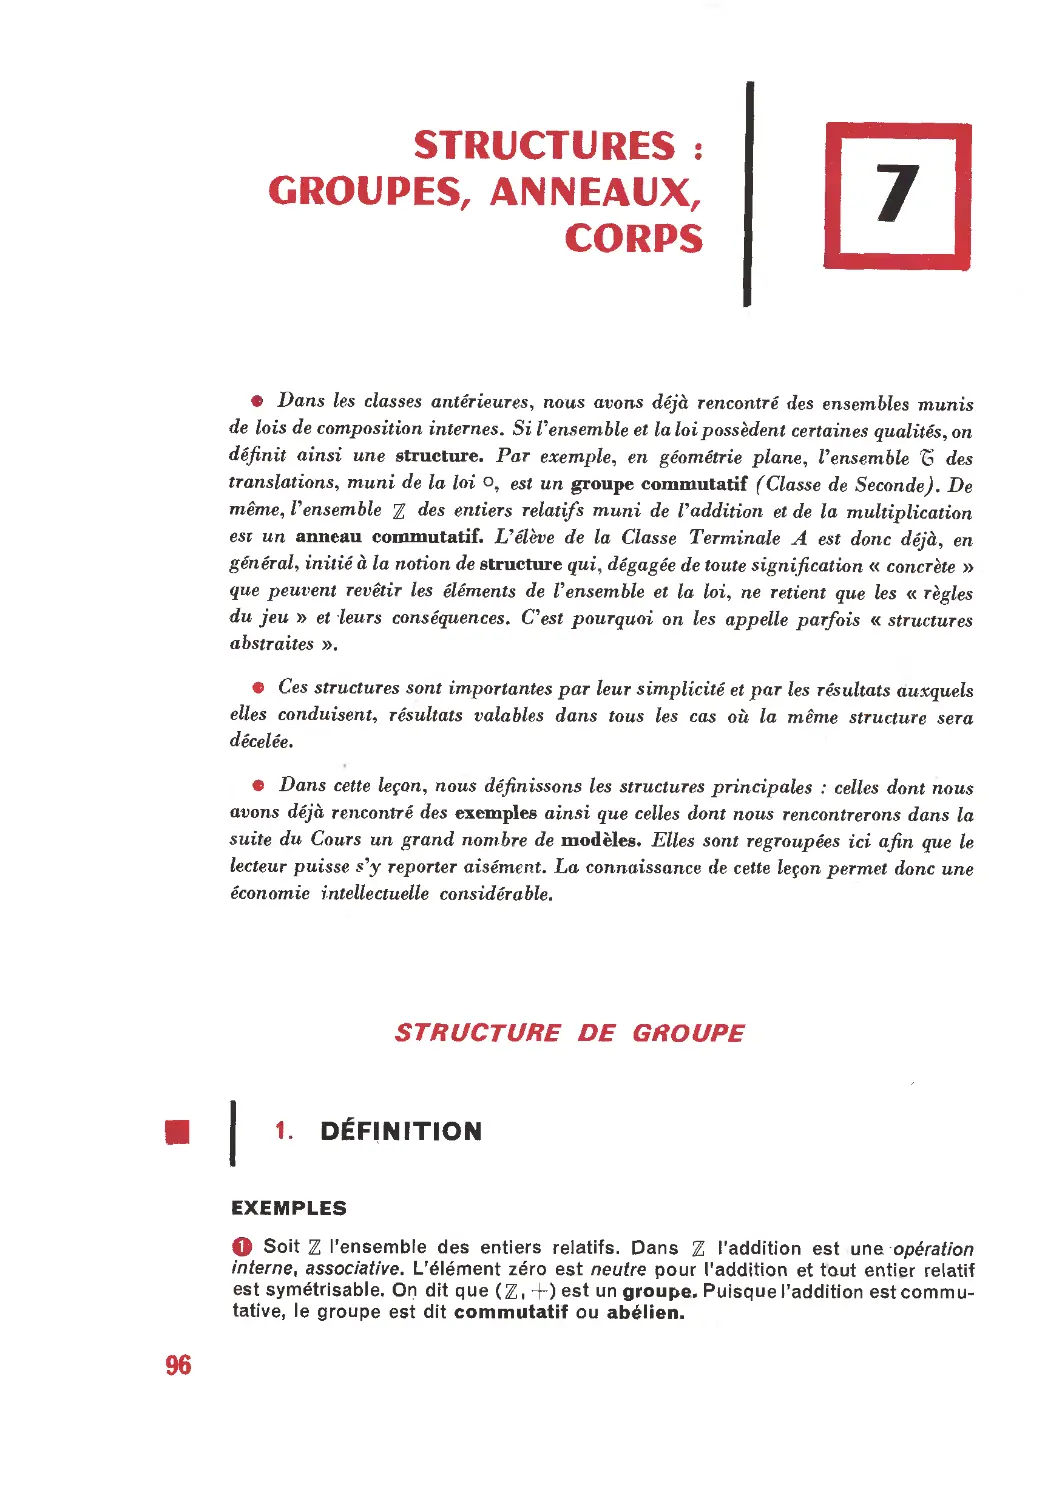 7. Structures : groupes, anneaux, corps